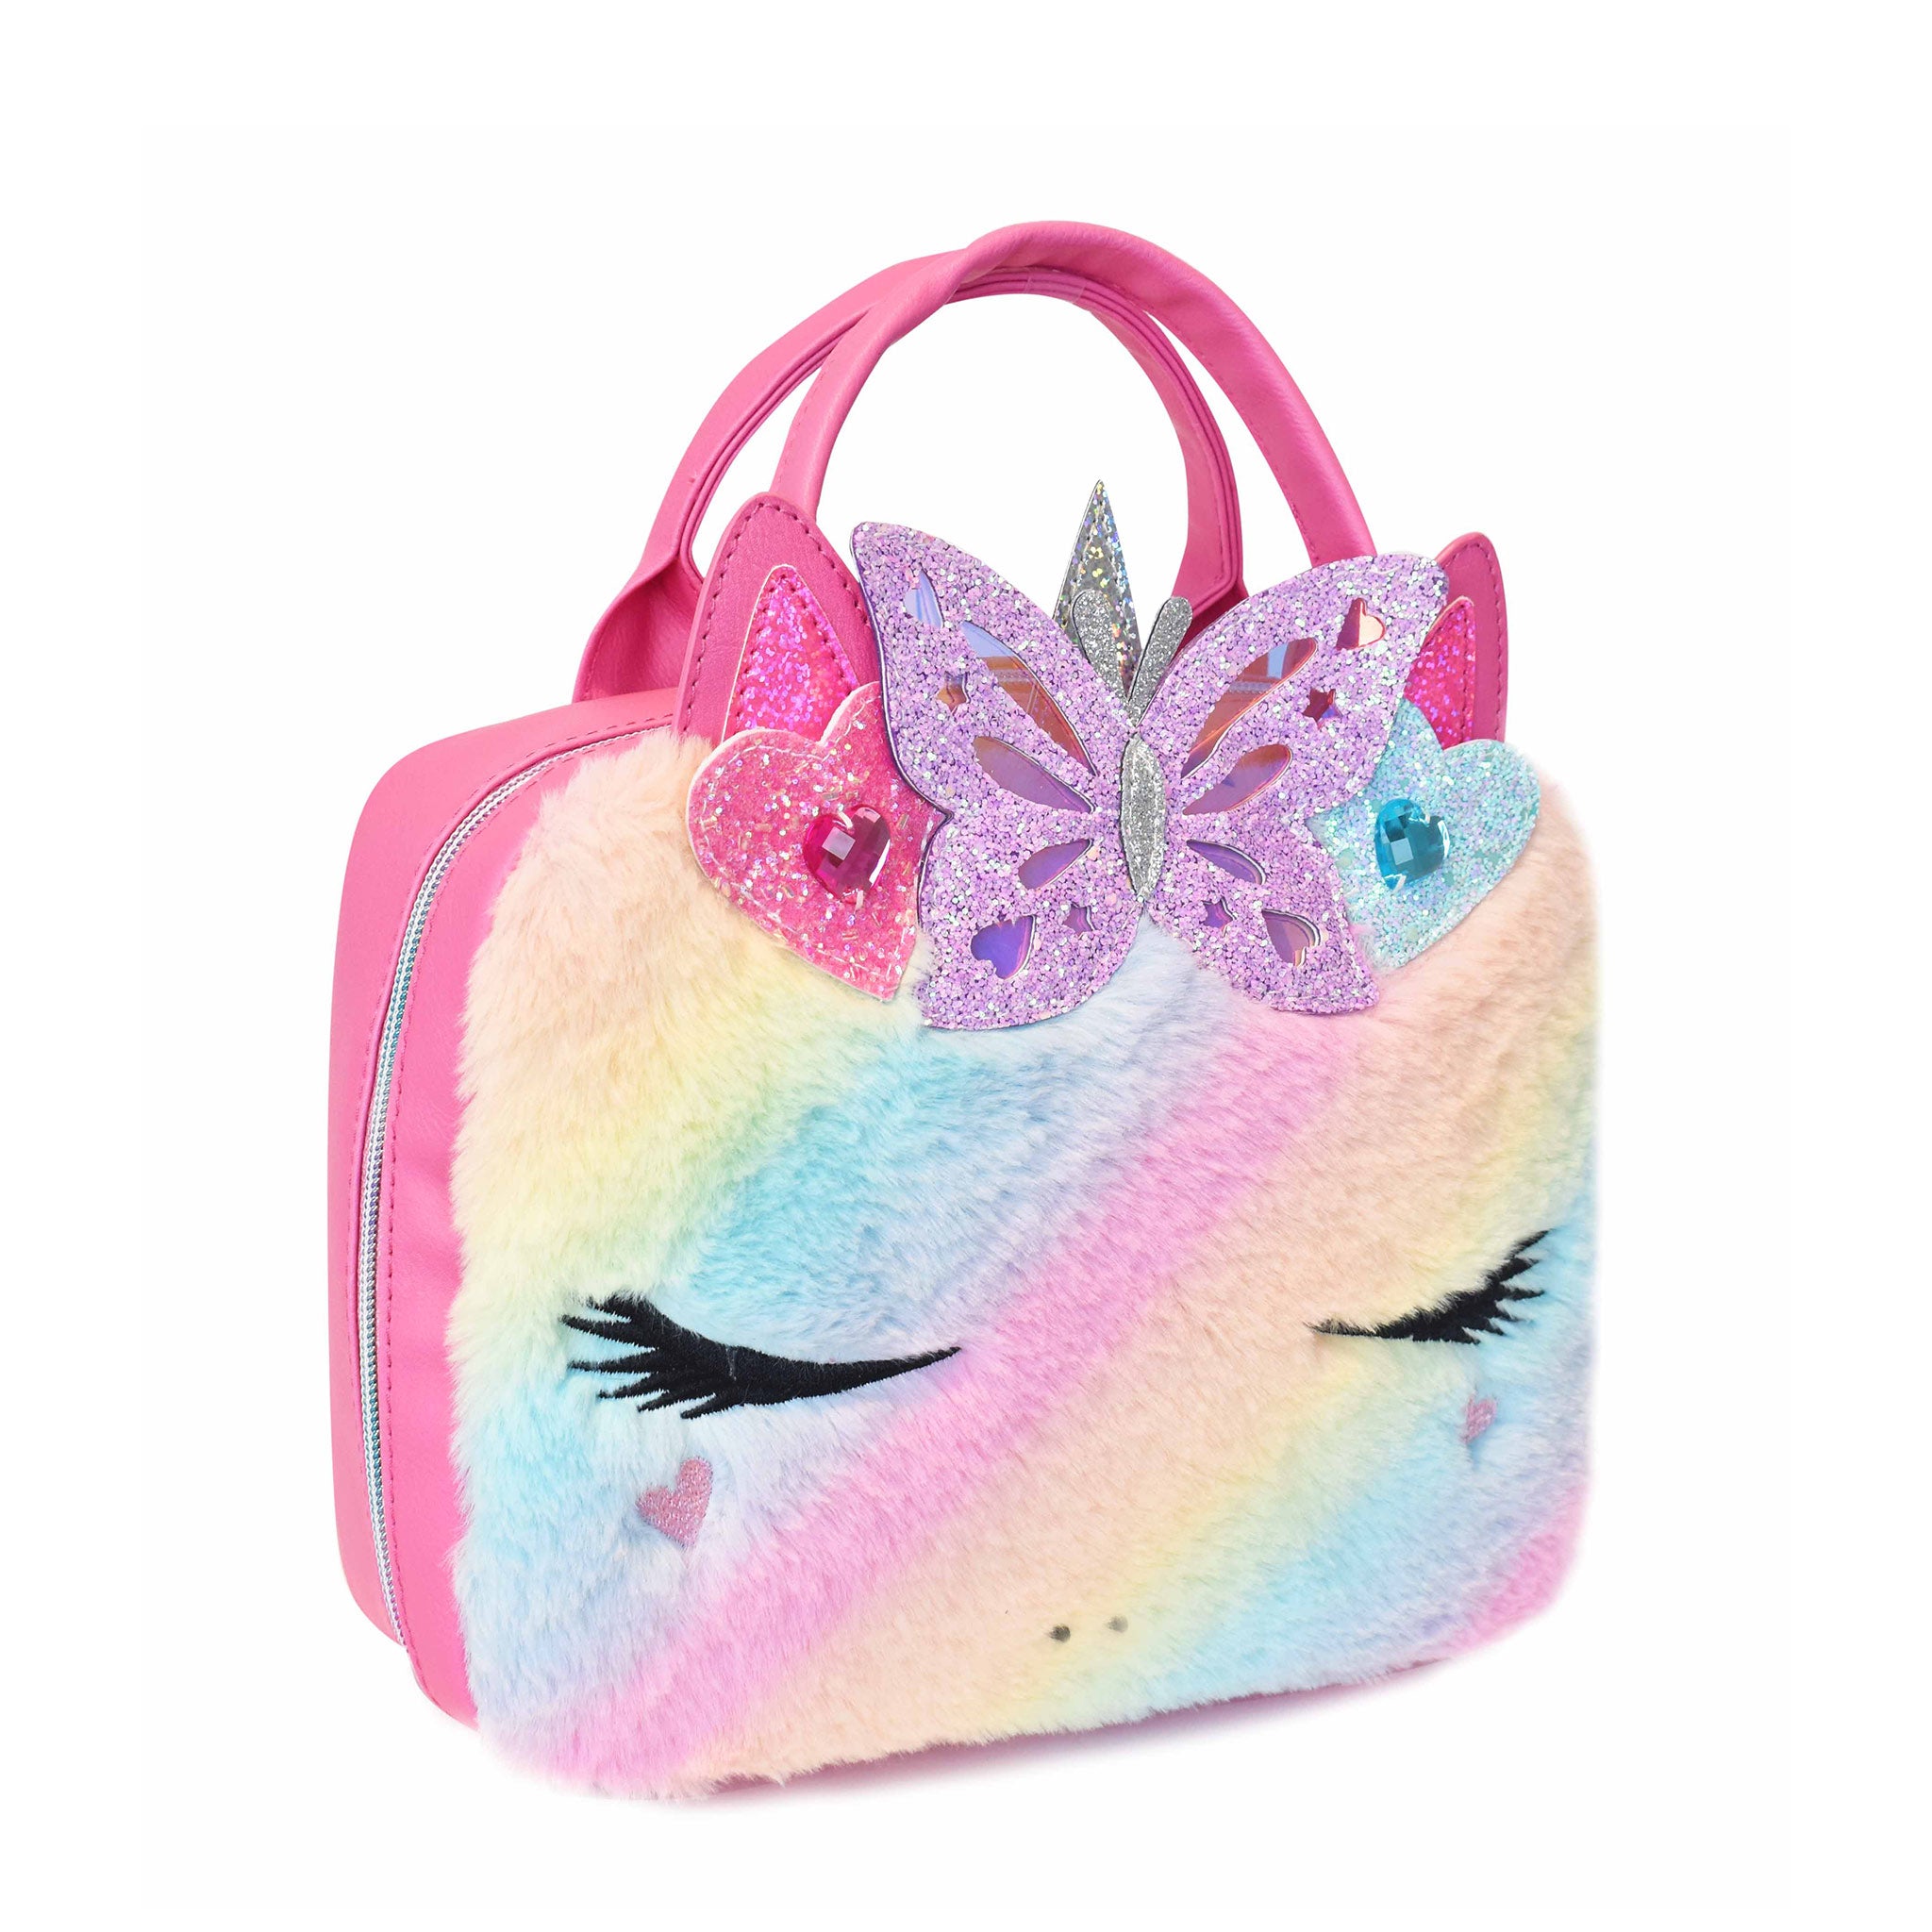 Side view of a unicorn face rectangular lunch bag in an ombre plush with a glitter heart crown applique